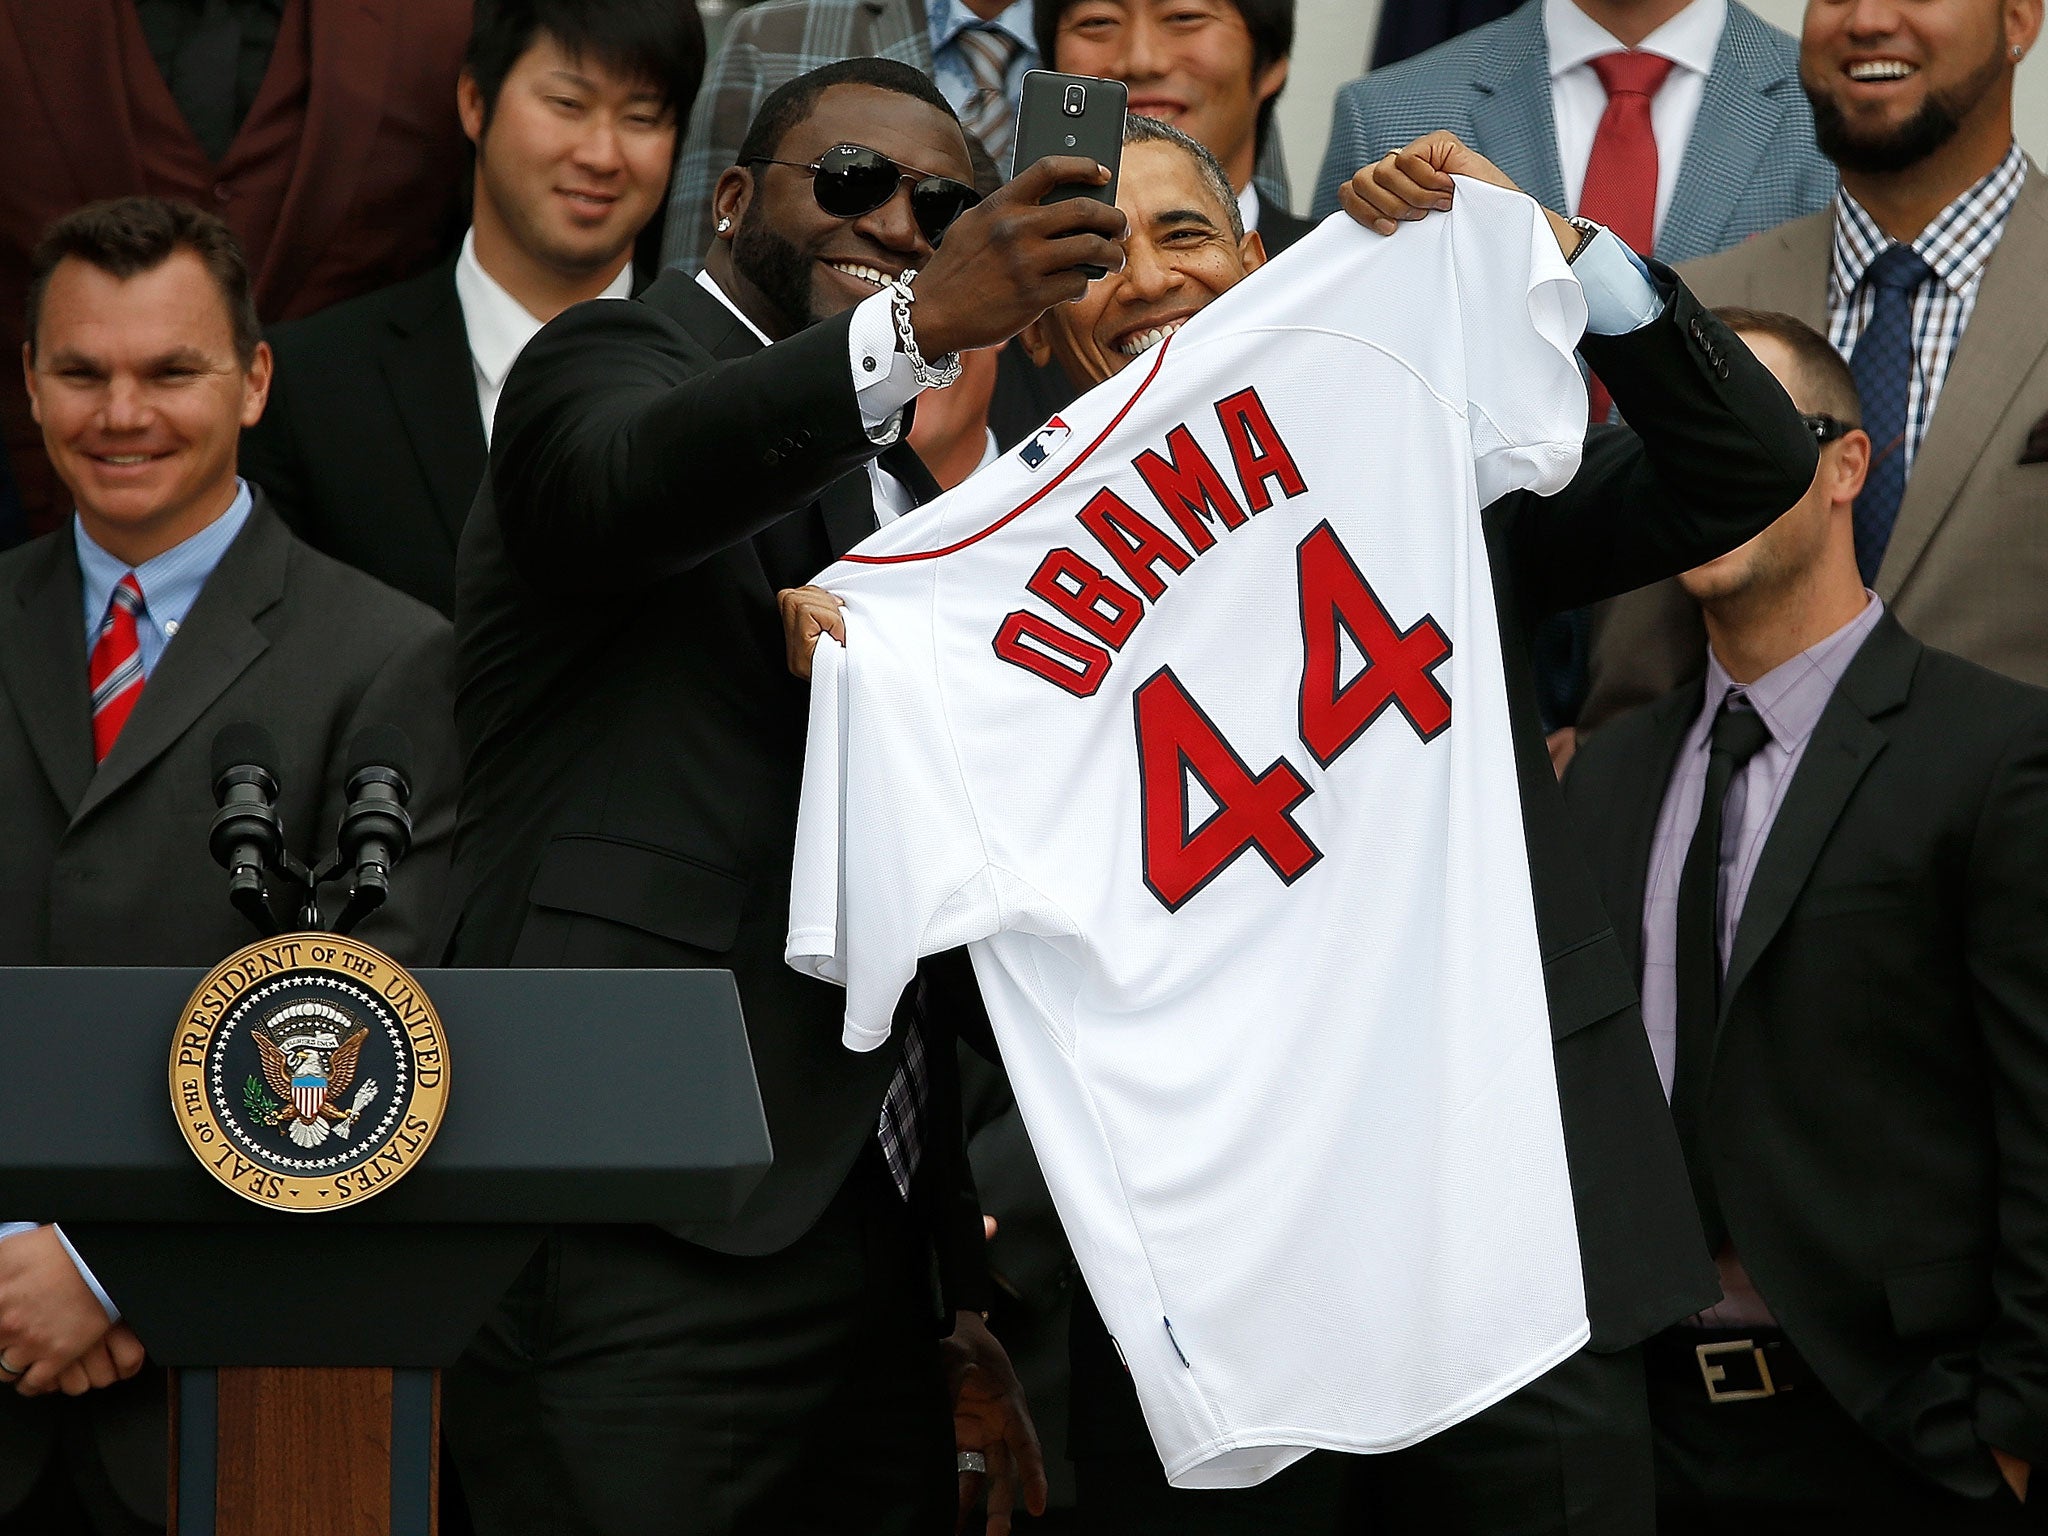 The White House has criticised Samsung for promoting a selfie of President Barack Obama taken by Boston Red Sox player David Ortiz on his Samsung phone earlier this week.